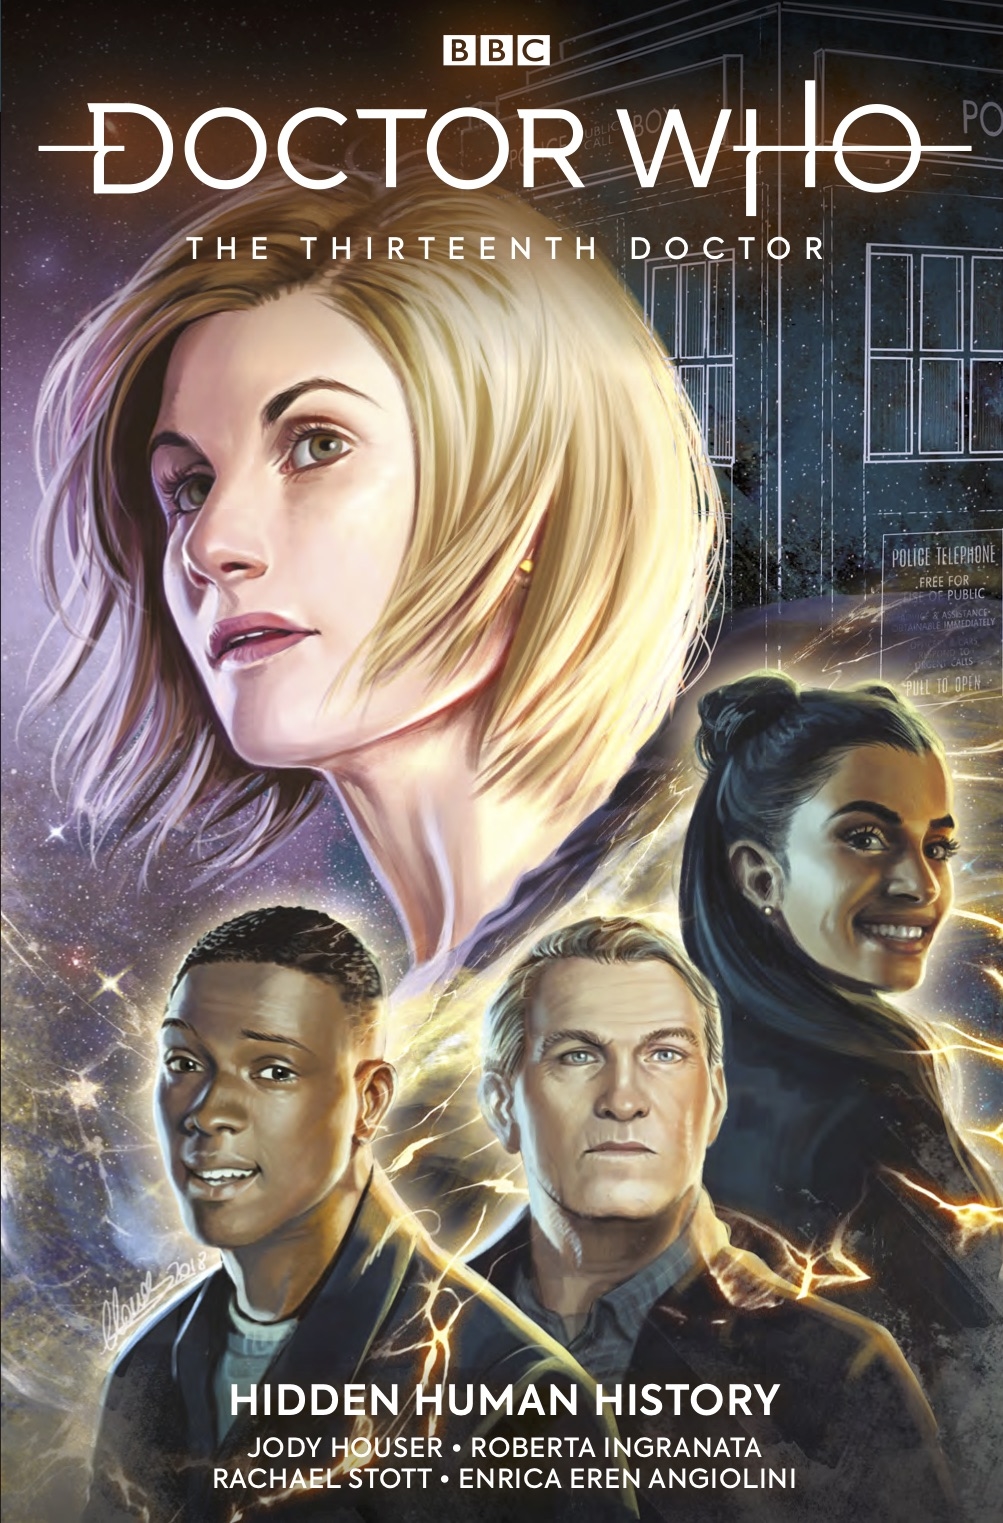 DOCTOR WHO THIRTEENTH DOCTOR VOL 02 TP